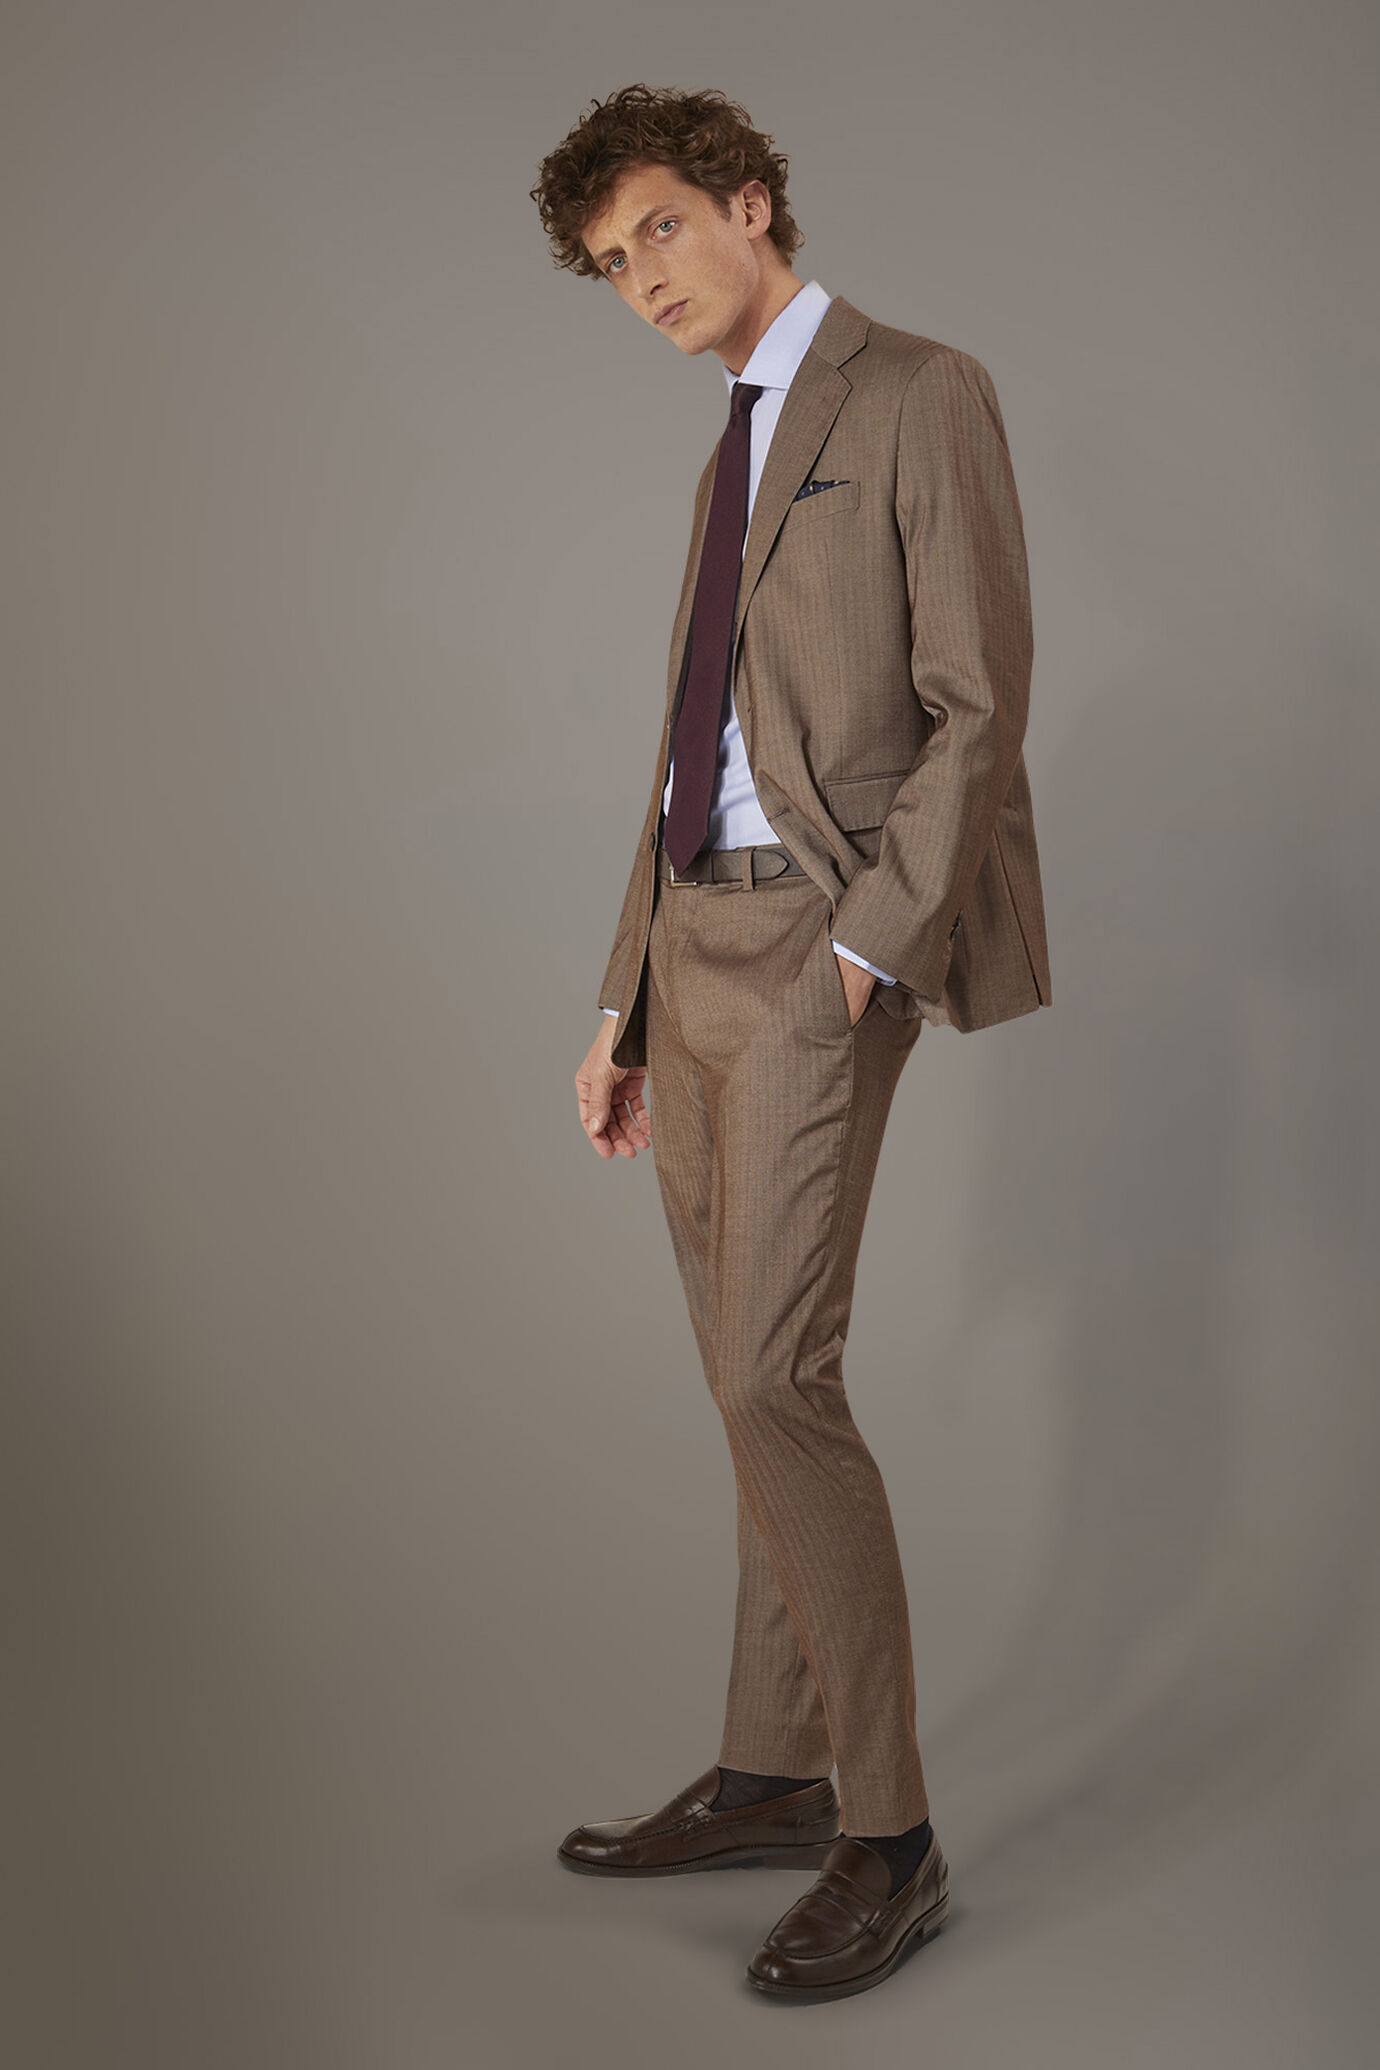 Regular fit single-breasted suit patterned herringbone fabric with solaro texture